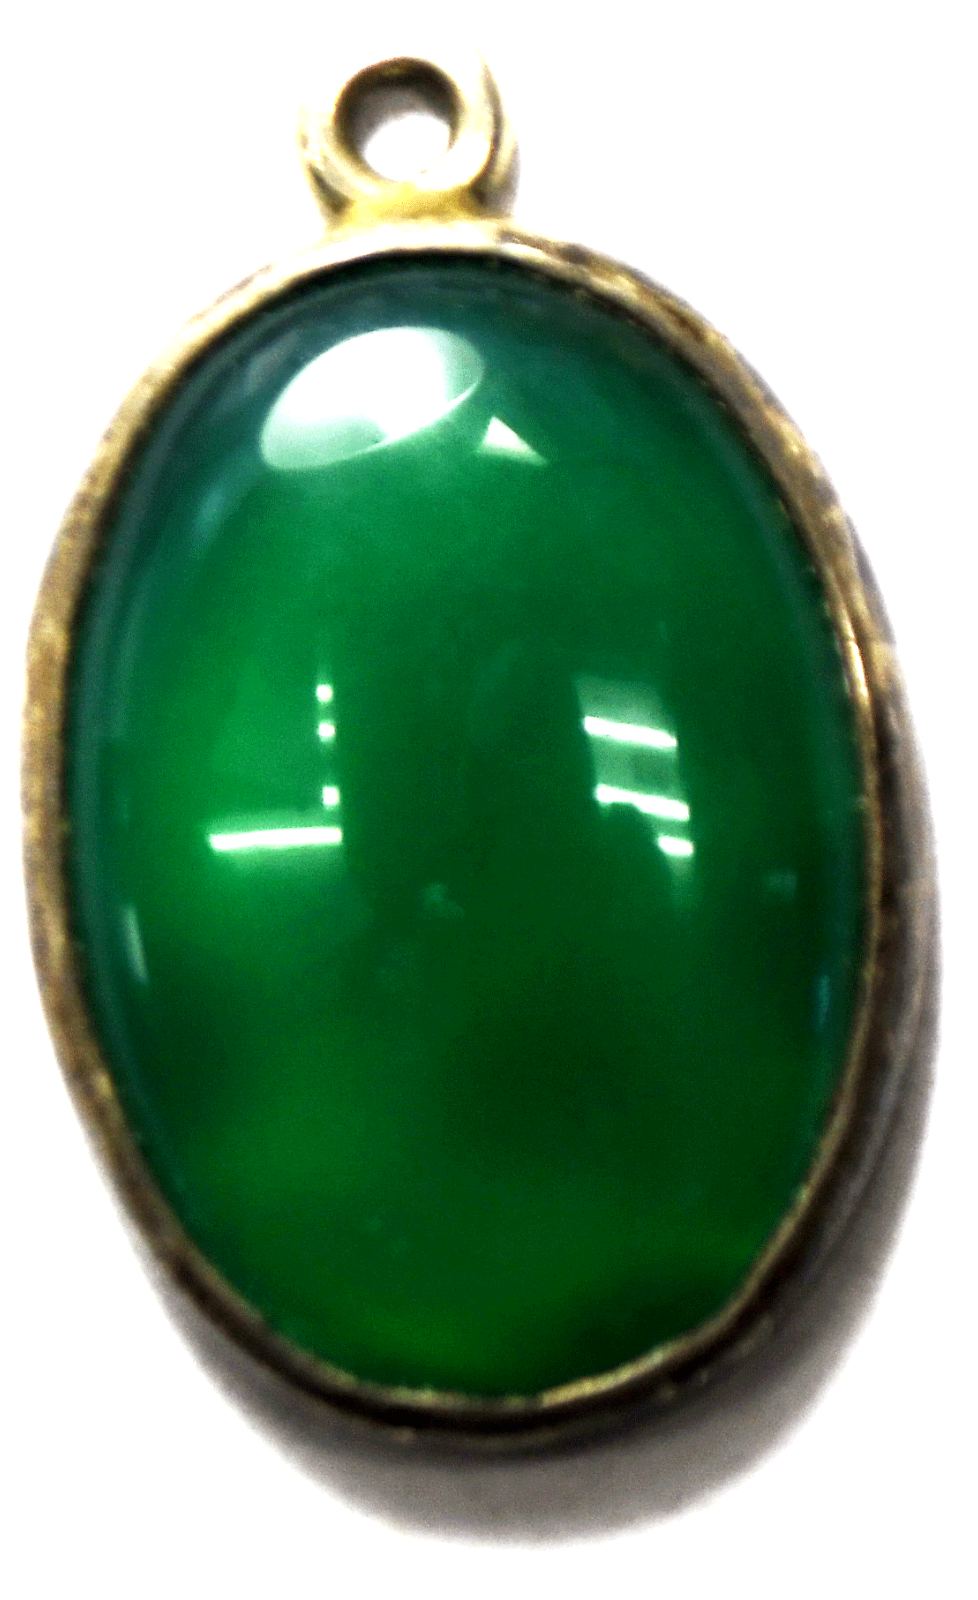 Sterling Silver Newman's Silver Shop Oval Green Onyx Pendant 29mm x 19mm